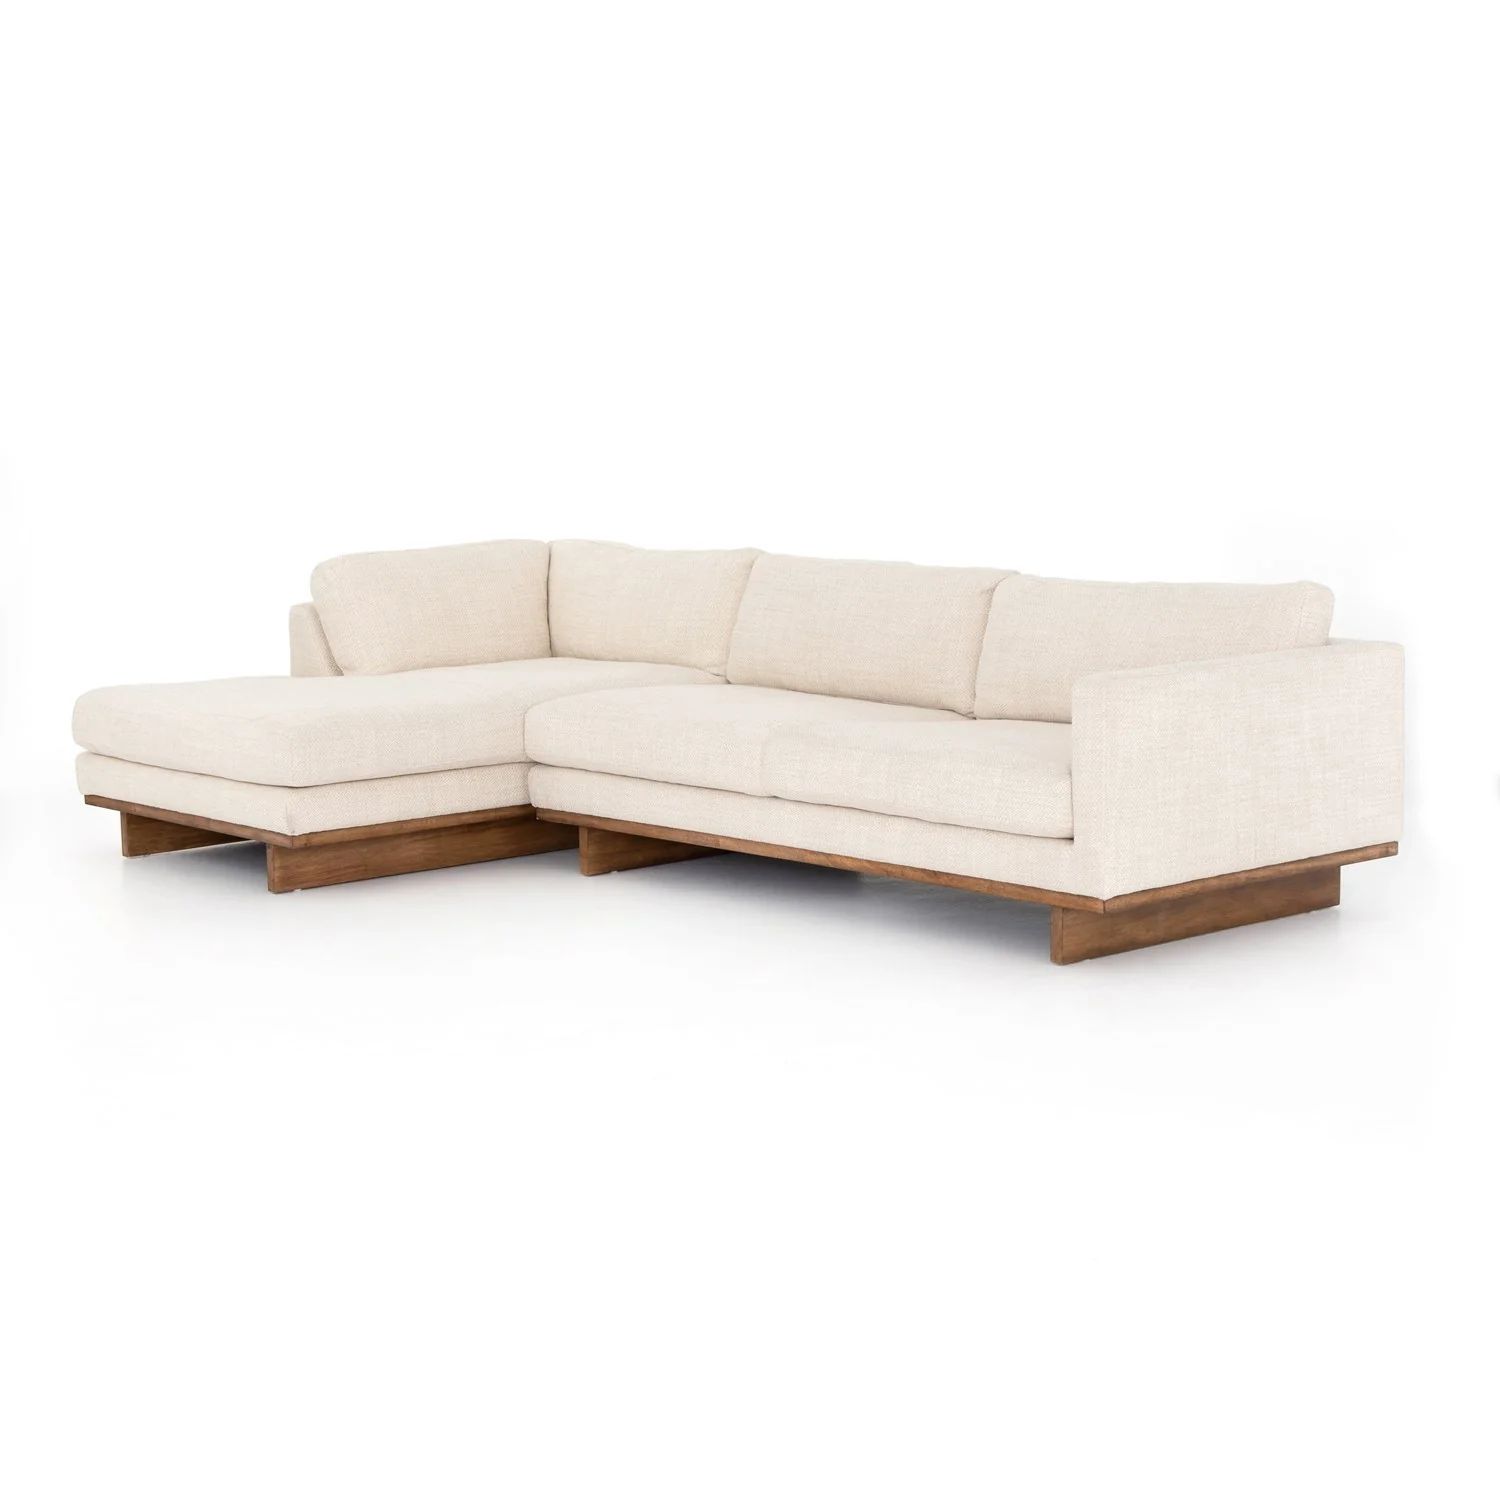 Everly 2-Piece Sectional in Various Sizes | Burke Decor